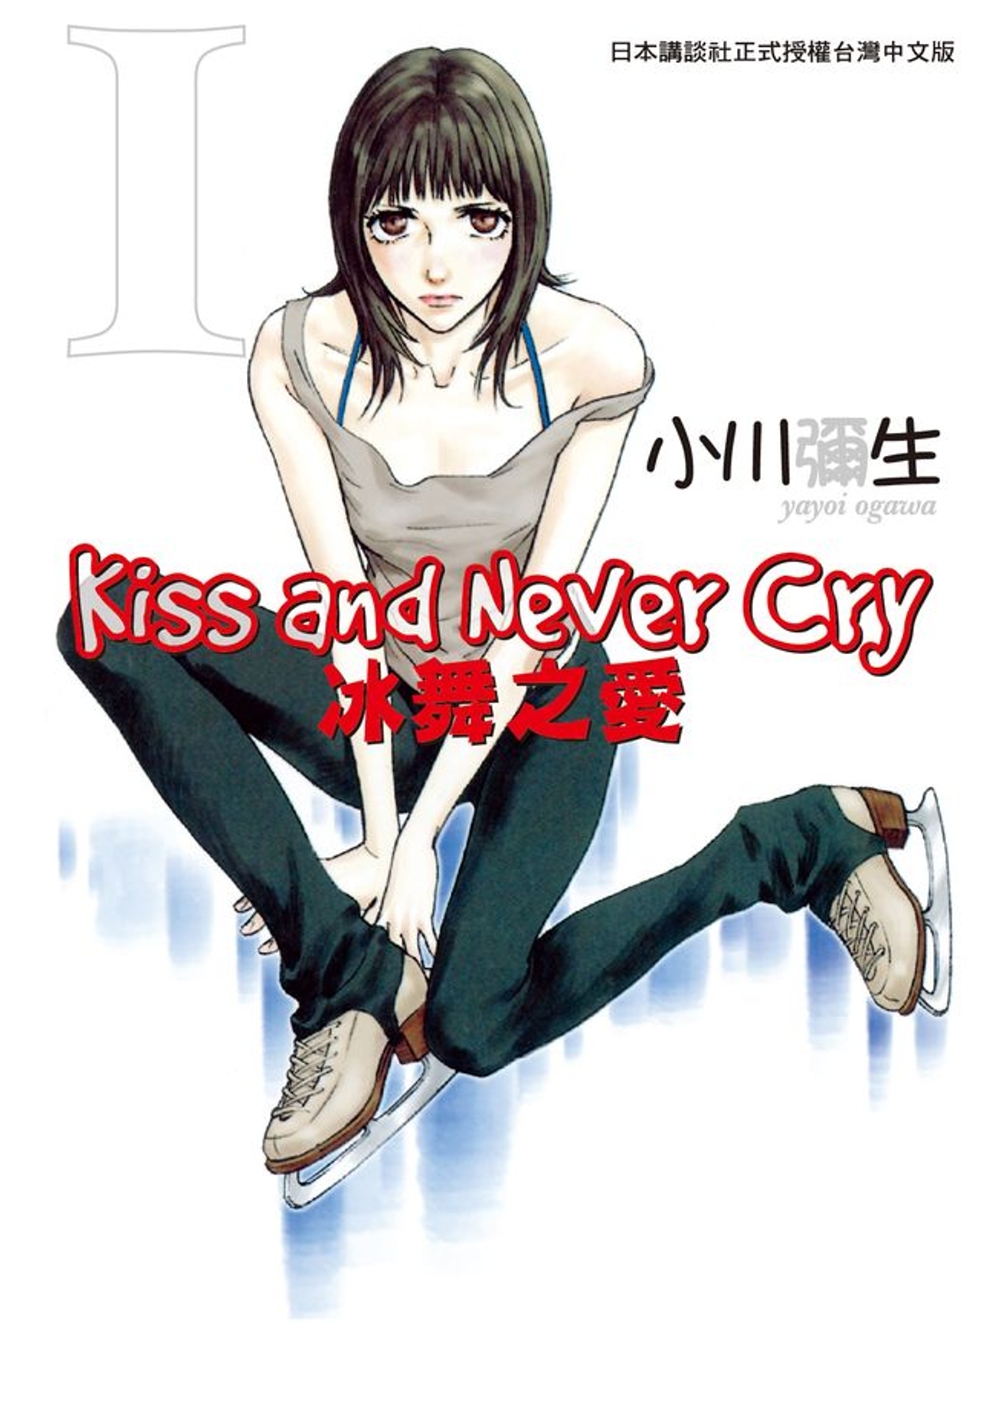 Kiss and Never Cry - 冰舞之愛 1